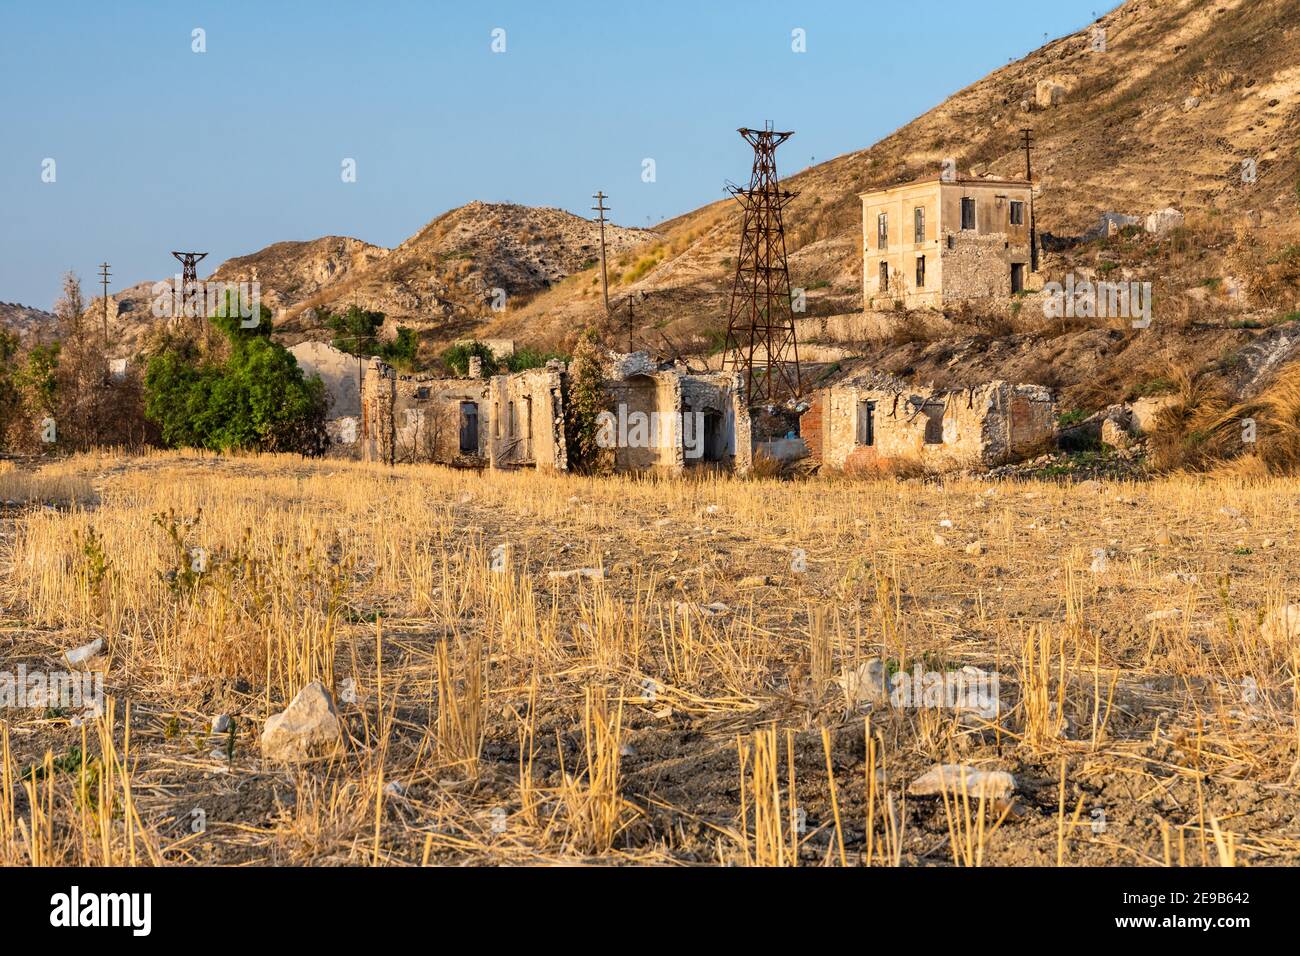 Abandoned buildings and machinery of the mining complex Trabia Tallarita in Riesi, near Caltanissetta, Italy Stock Photo